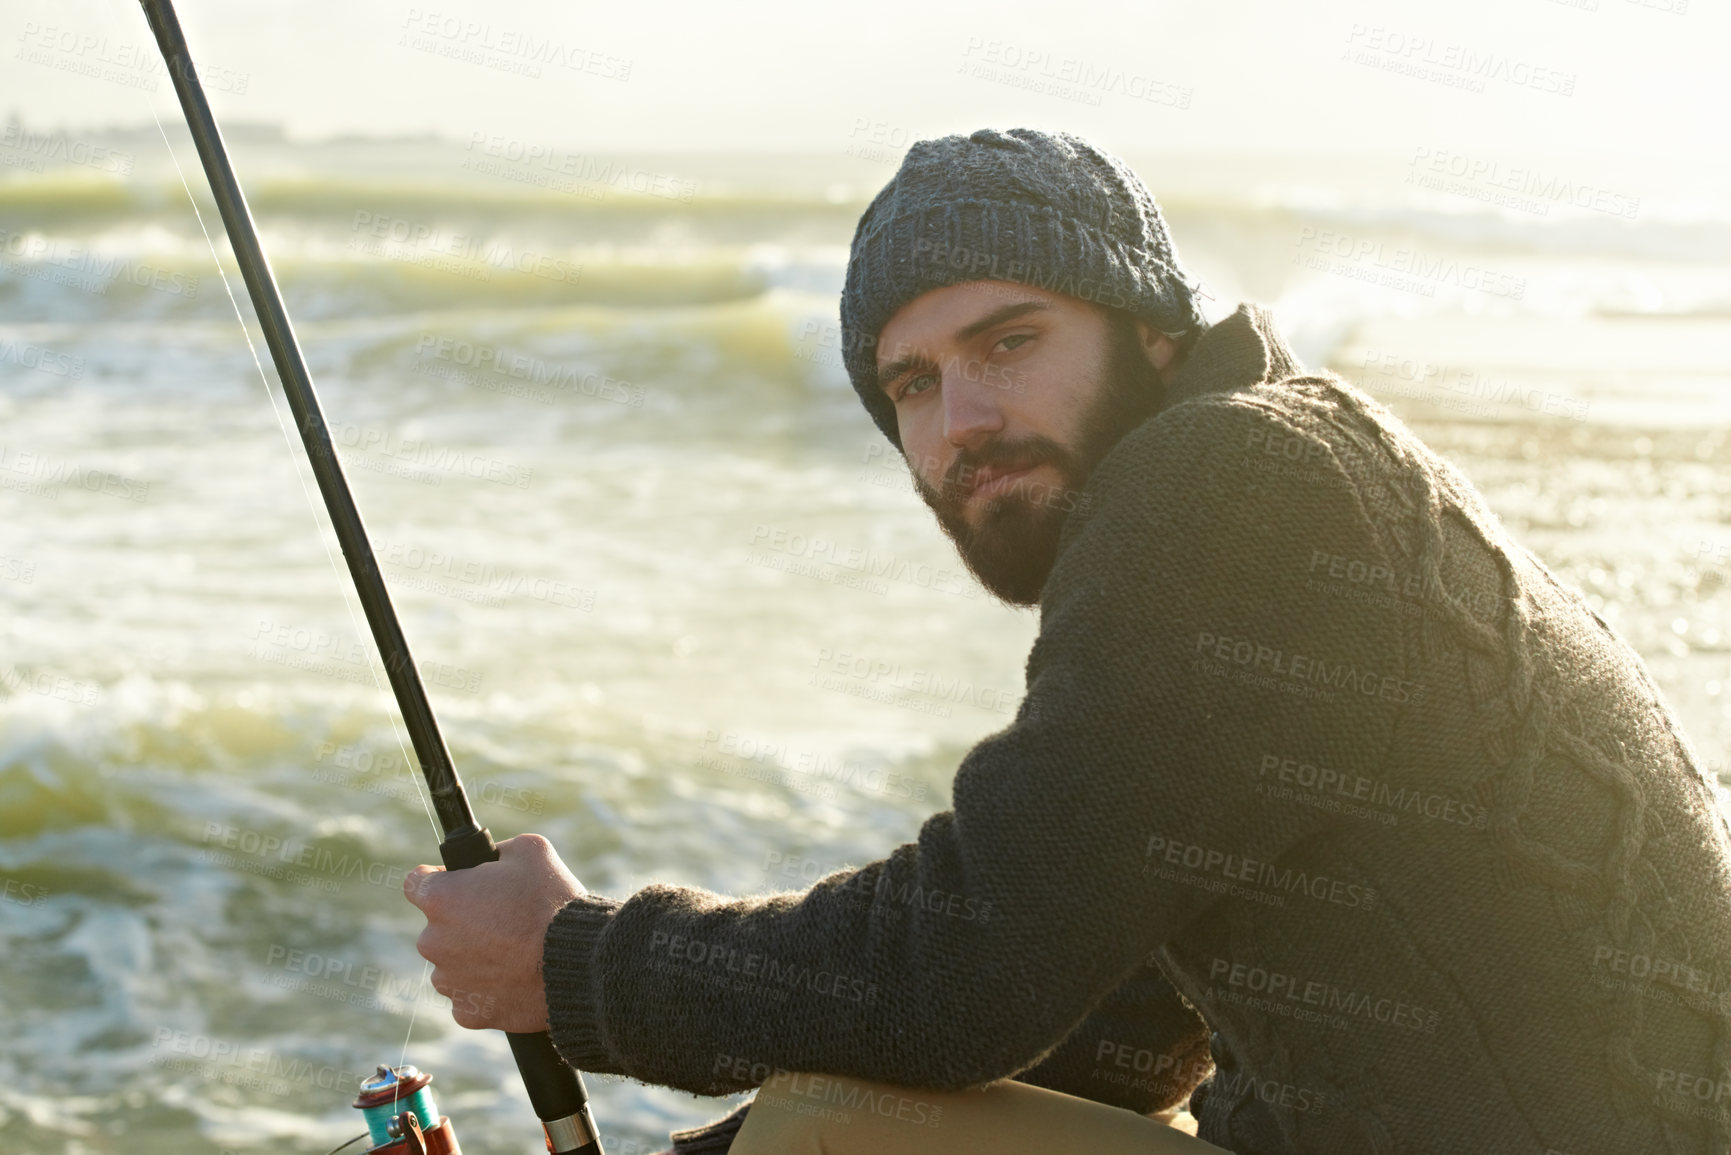 Buy stock photo Cropped shot of a bearded man fishing on the beach